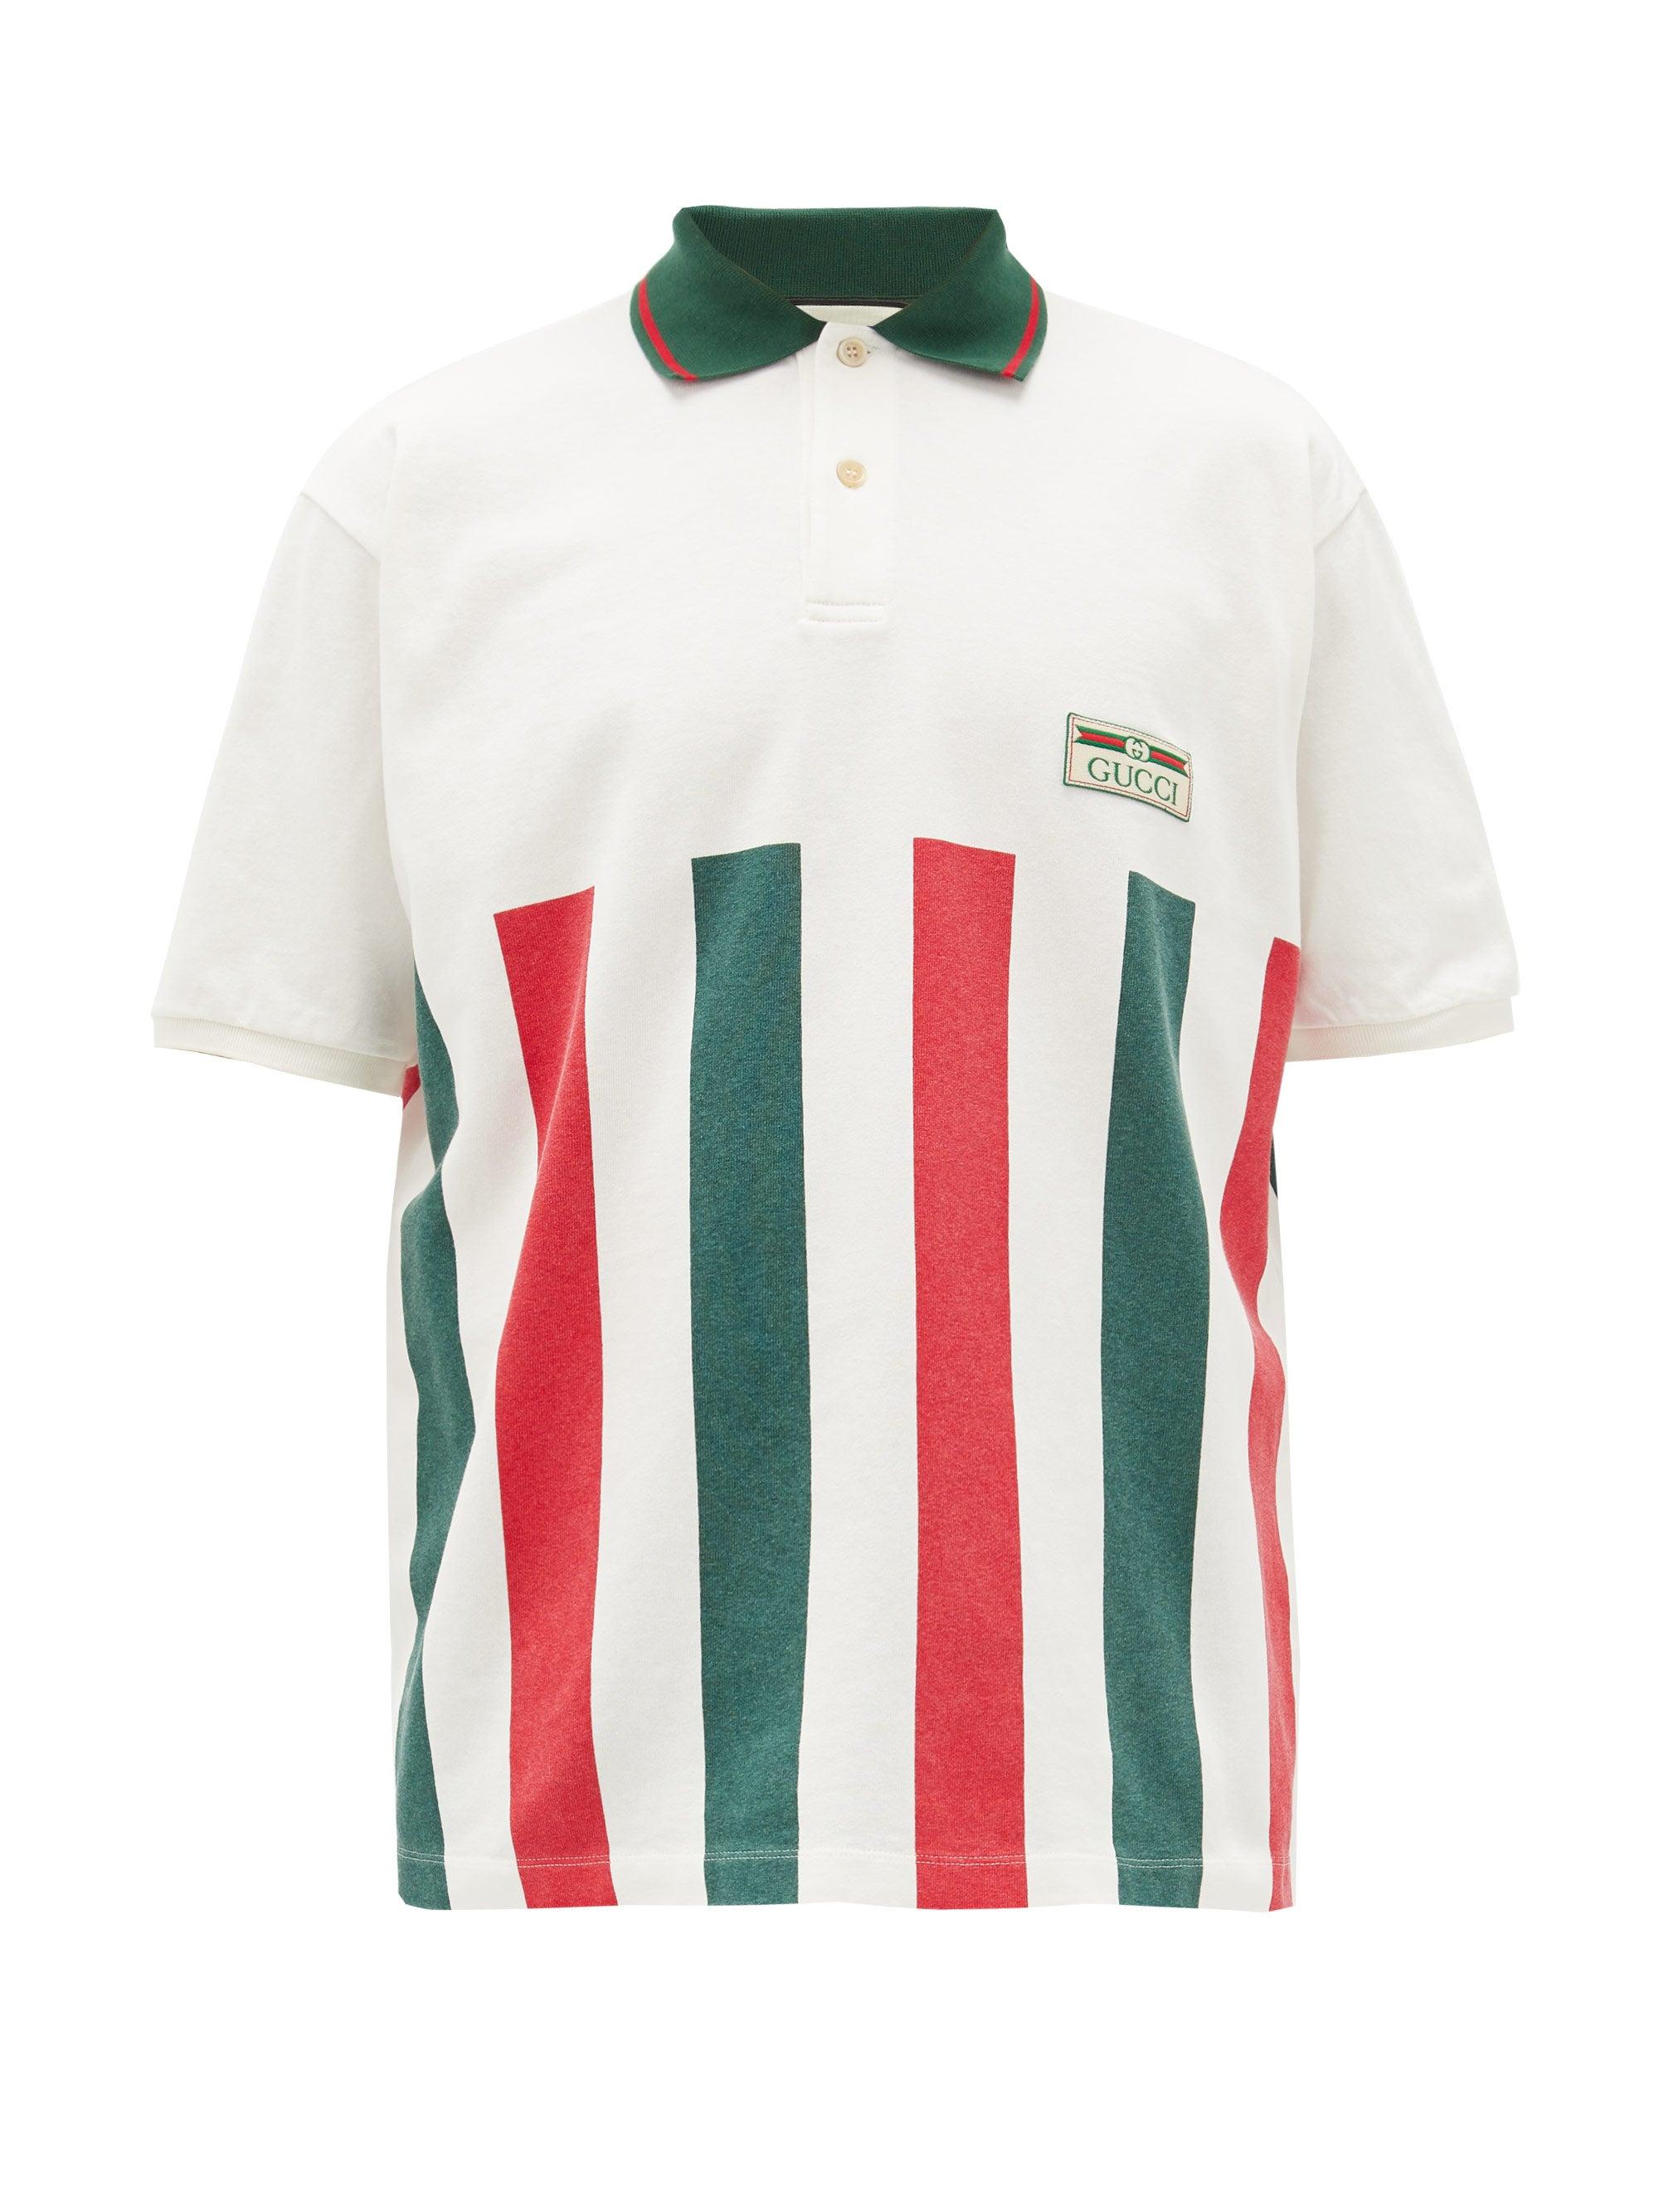 Gucci Striped Logo Polo in White Green Red (White) for Men - Lyst